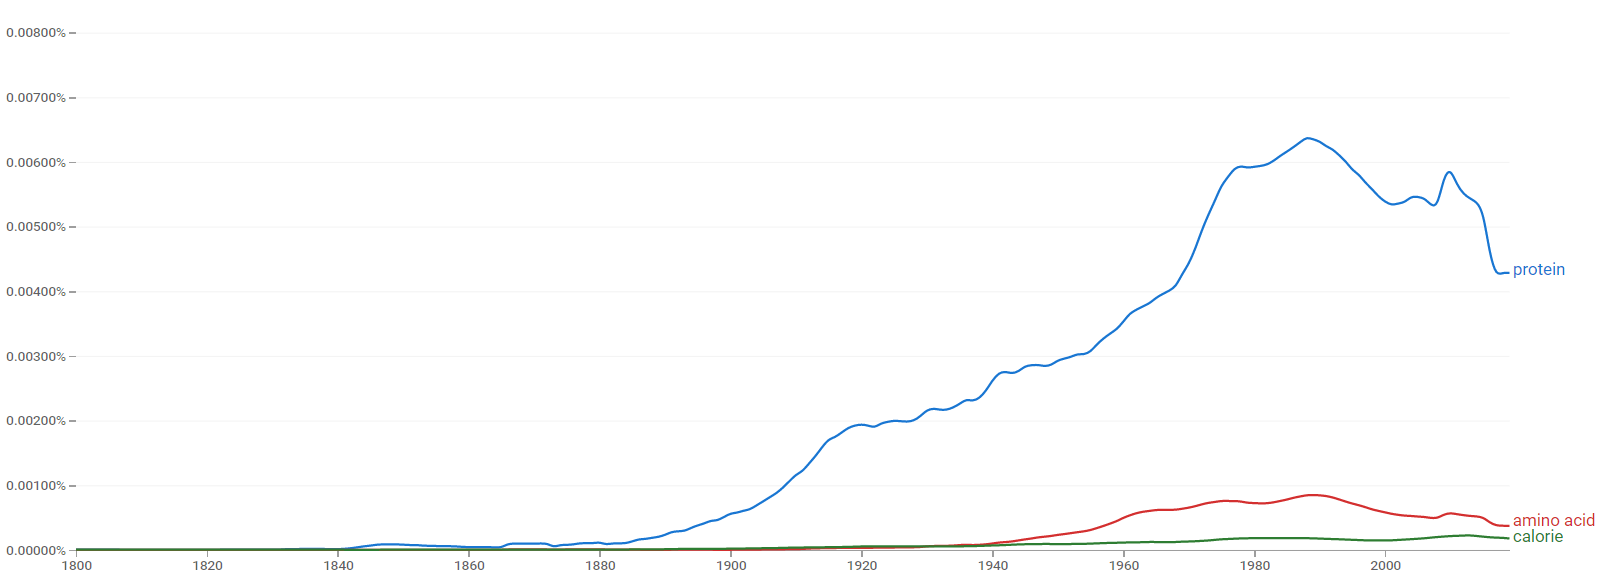 Protein ngram.png